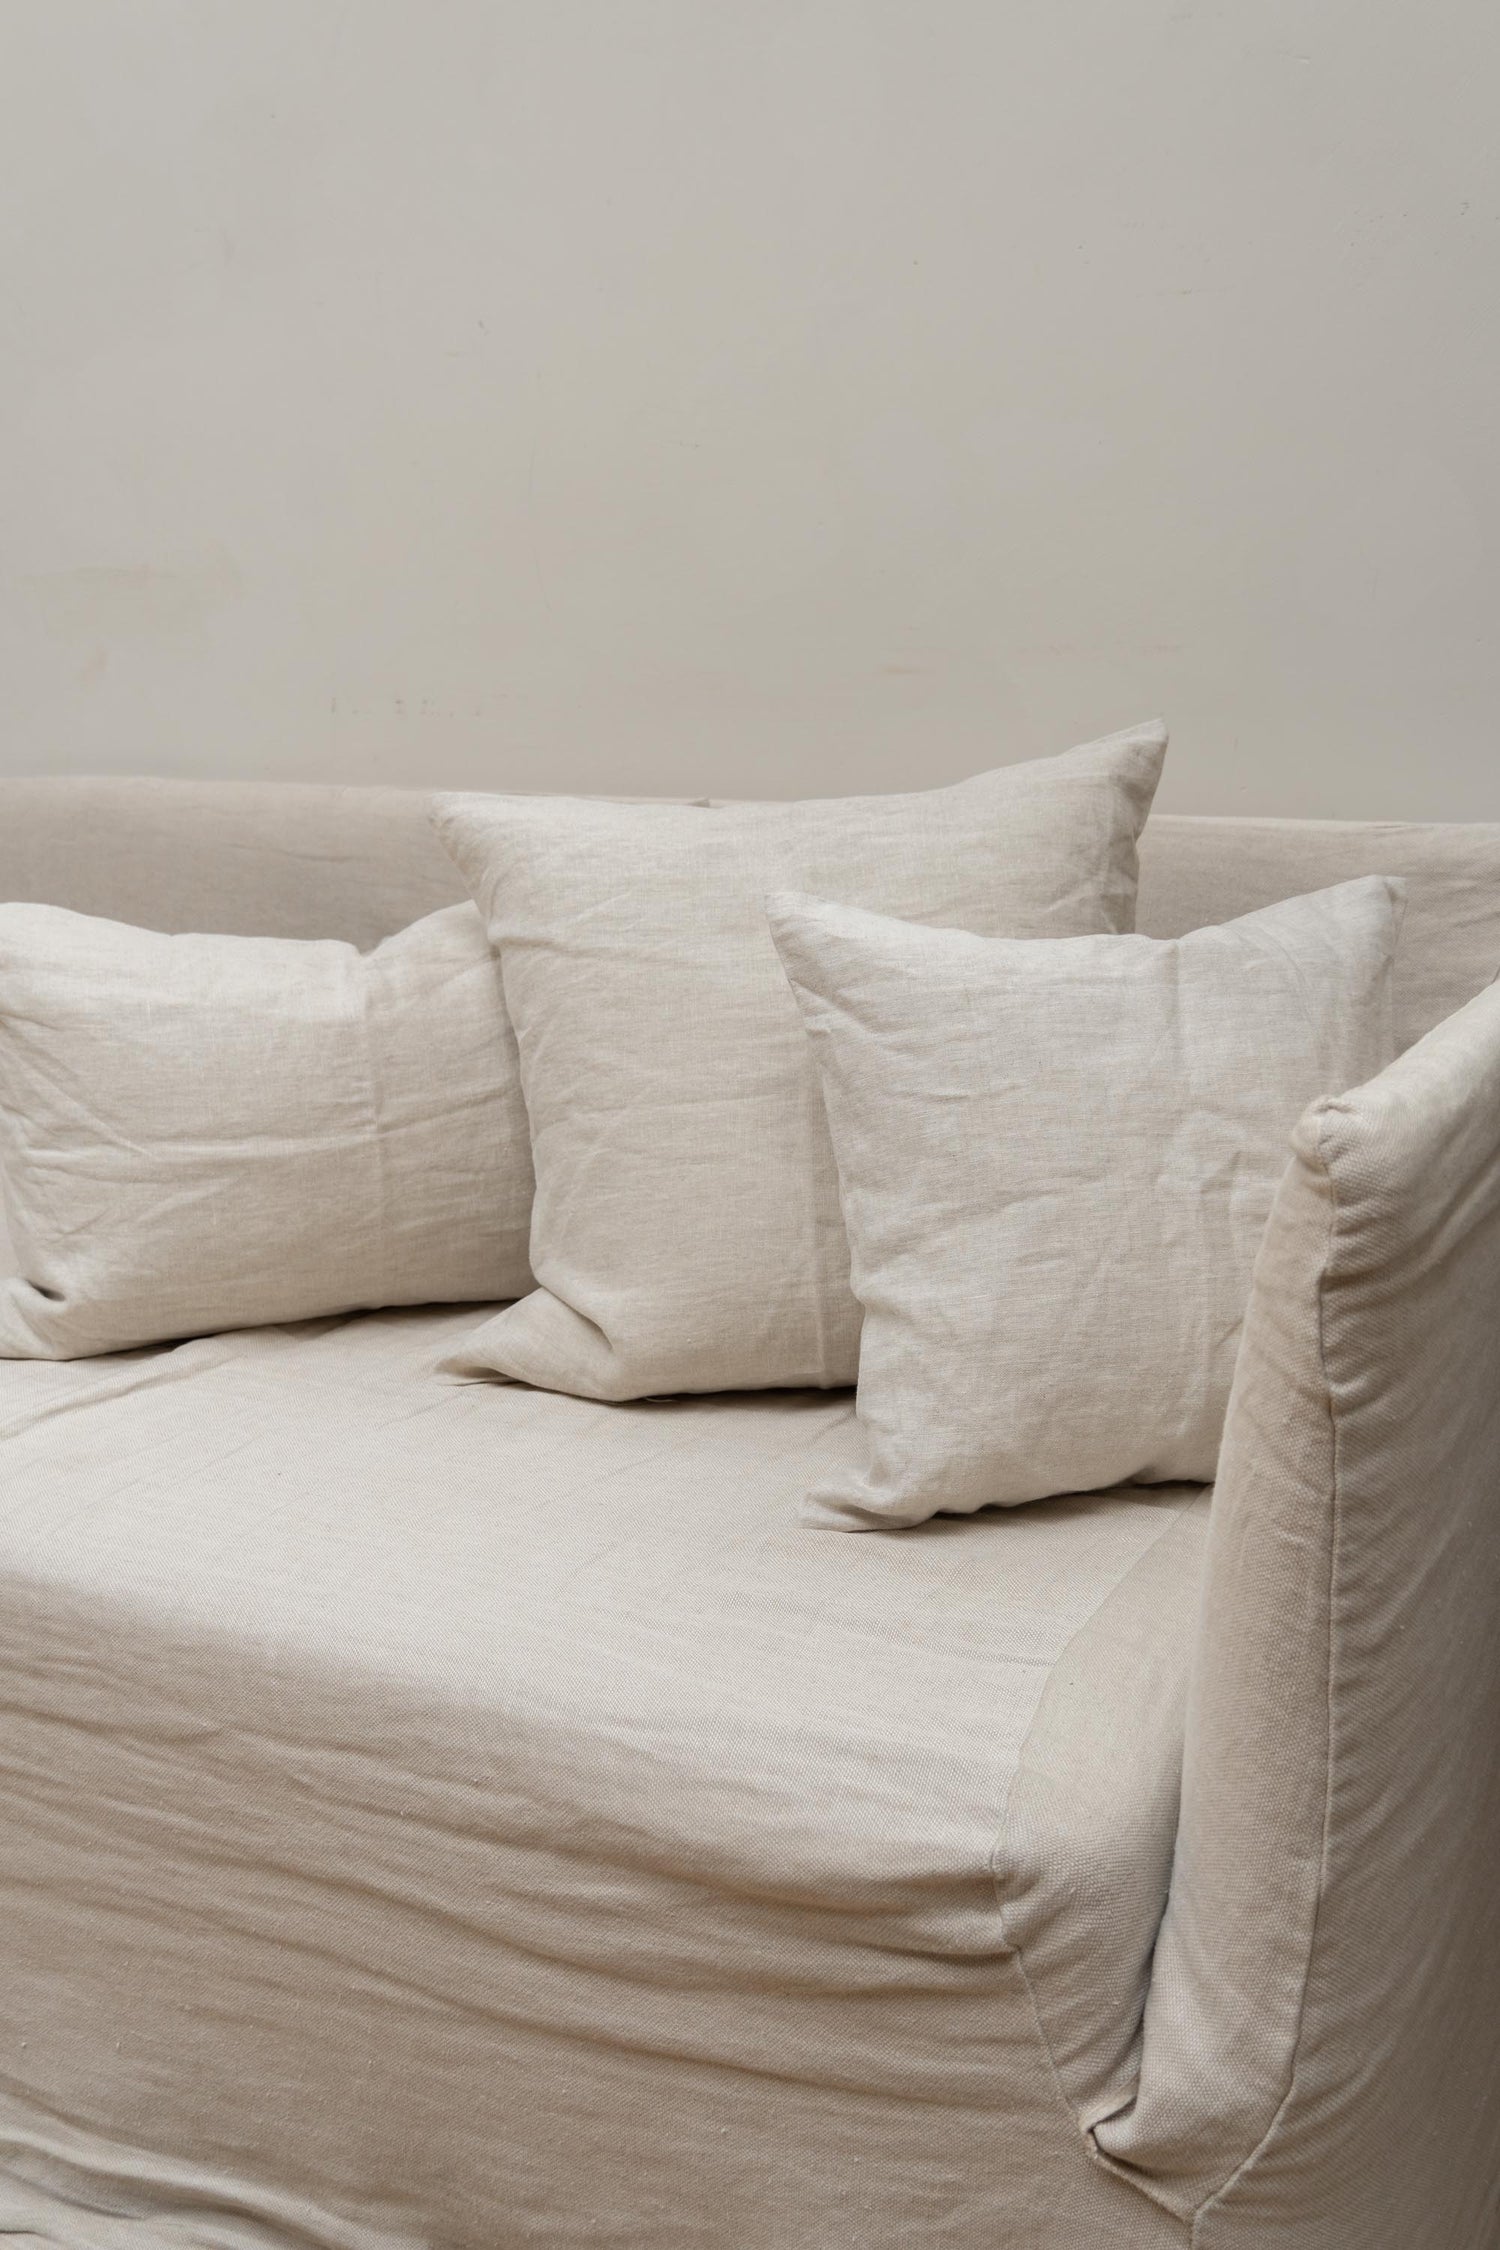 Oatmeal Linen Cushions by Timeless Linen set on couch in a light and neutral interior at Enter The Loft.